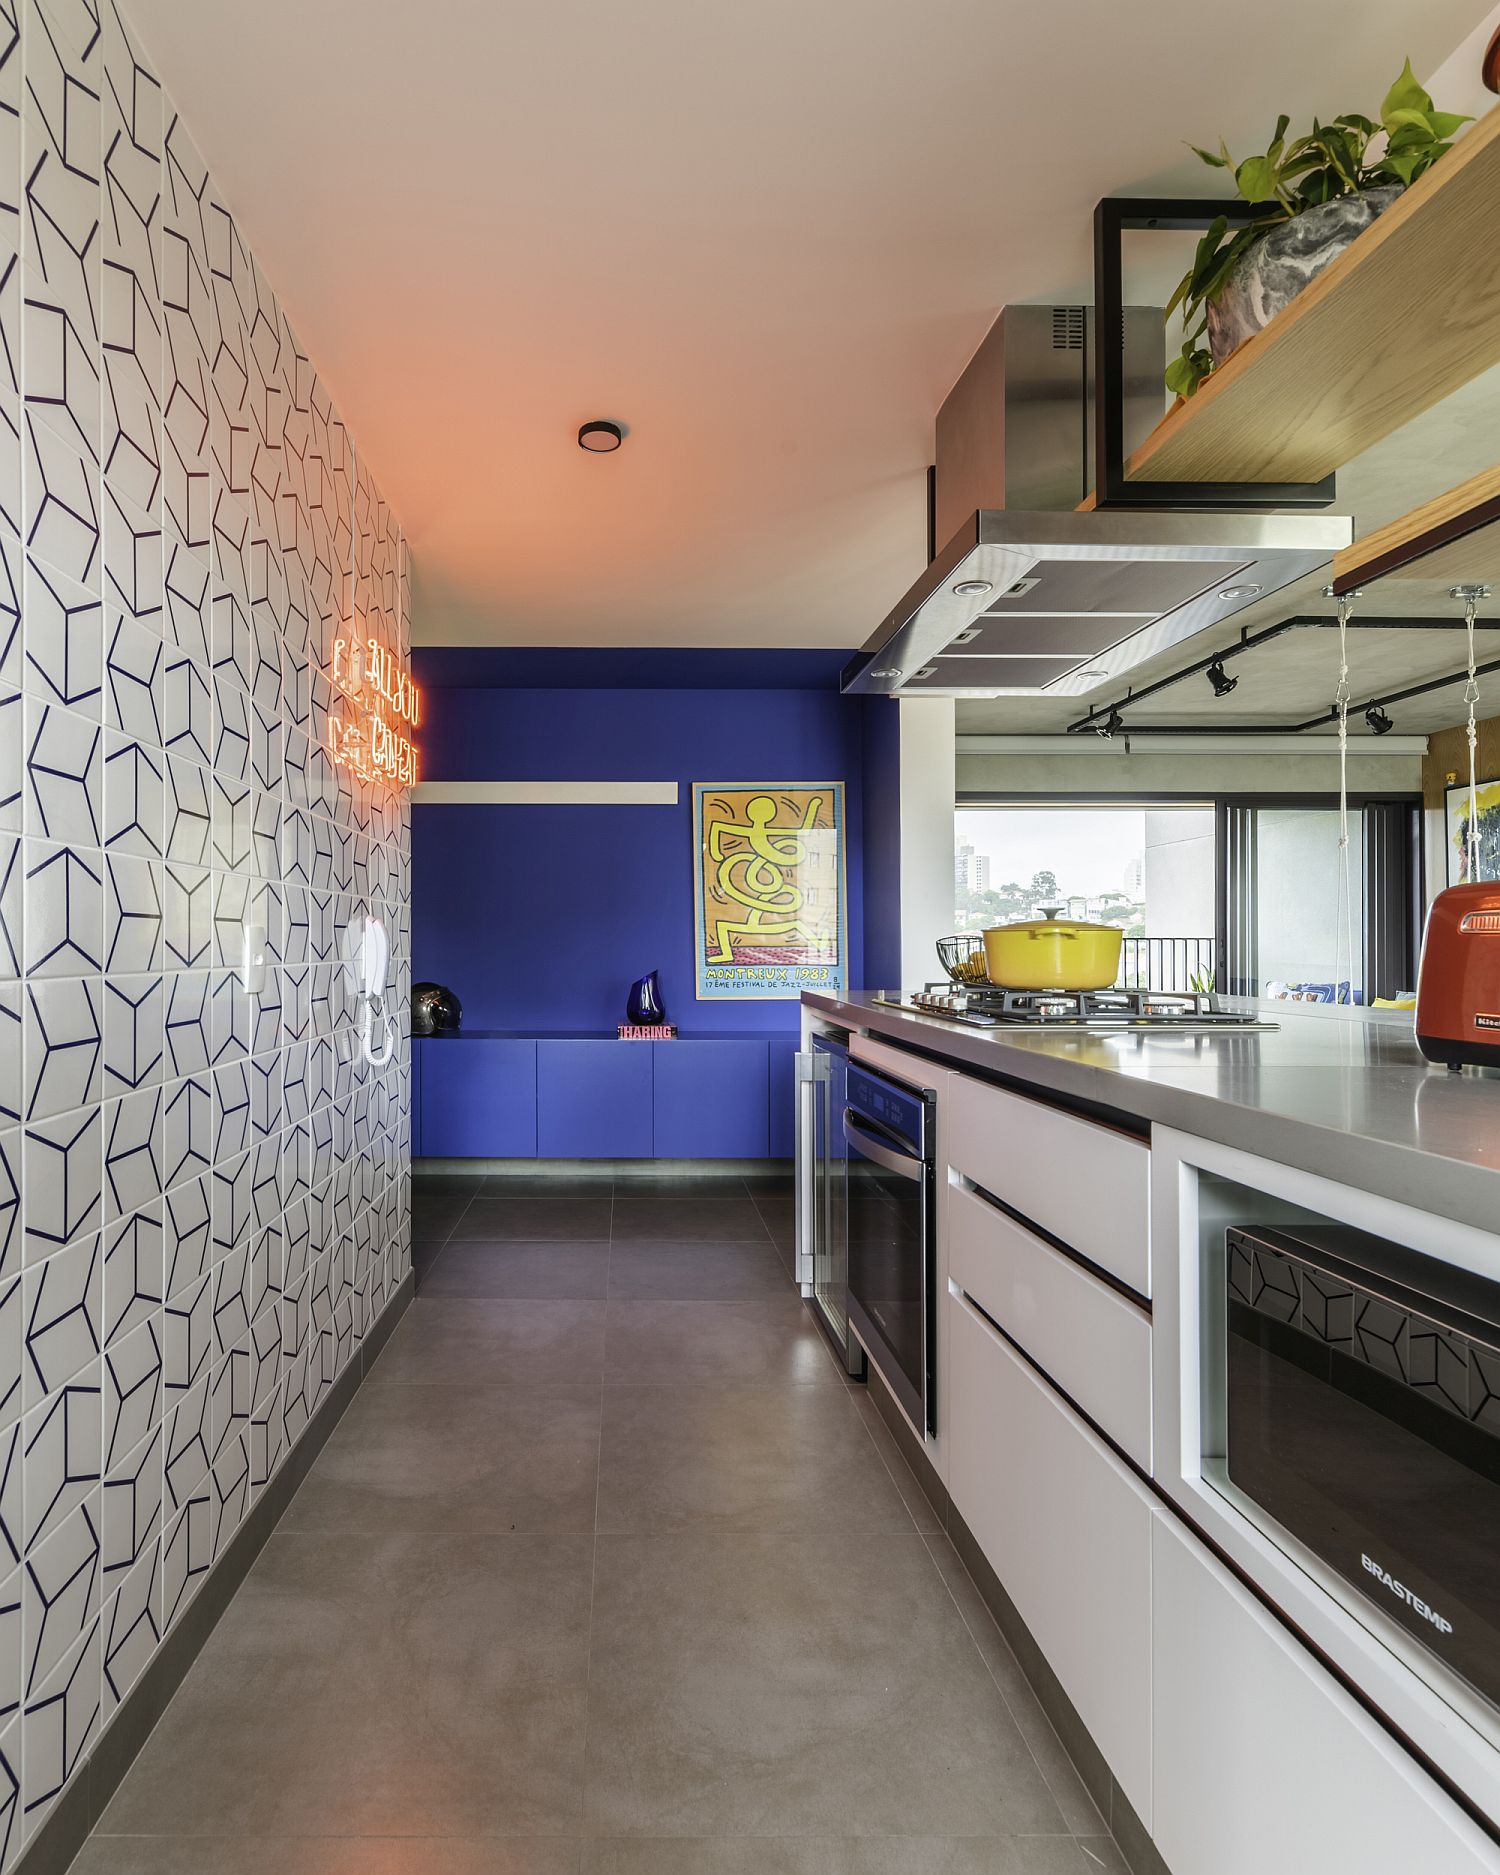 Custom-tiled-backdrop-for-the-small-kitchen-along-with-a-blue-home-bar-96312